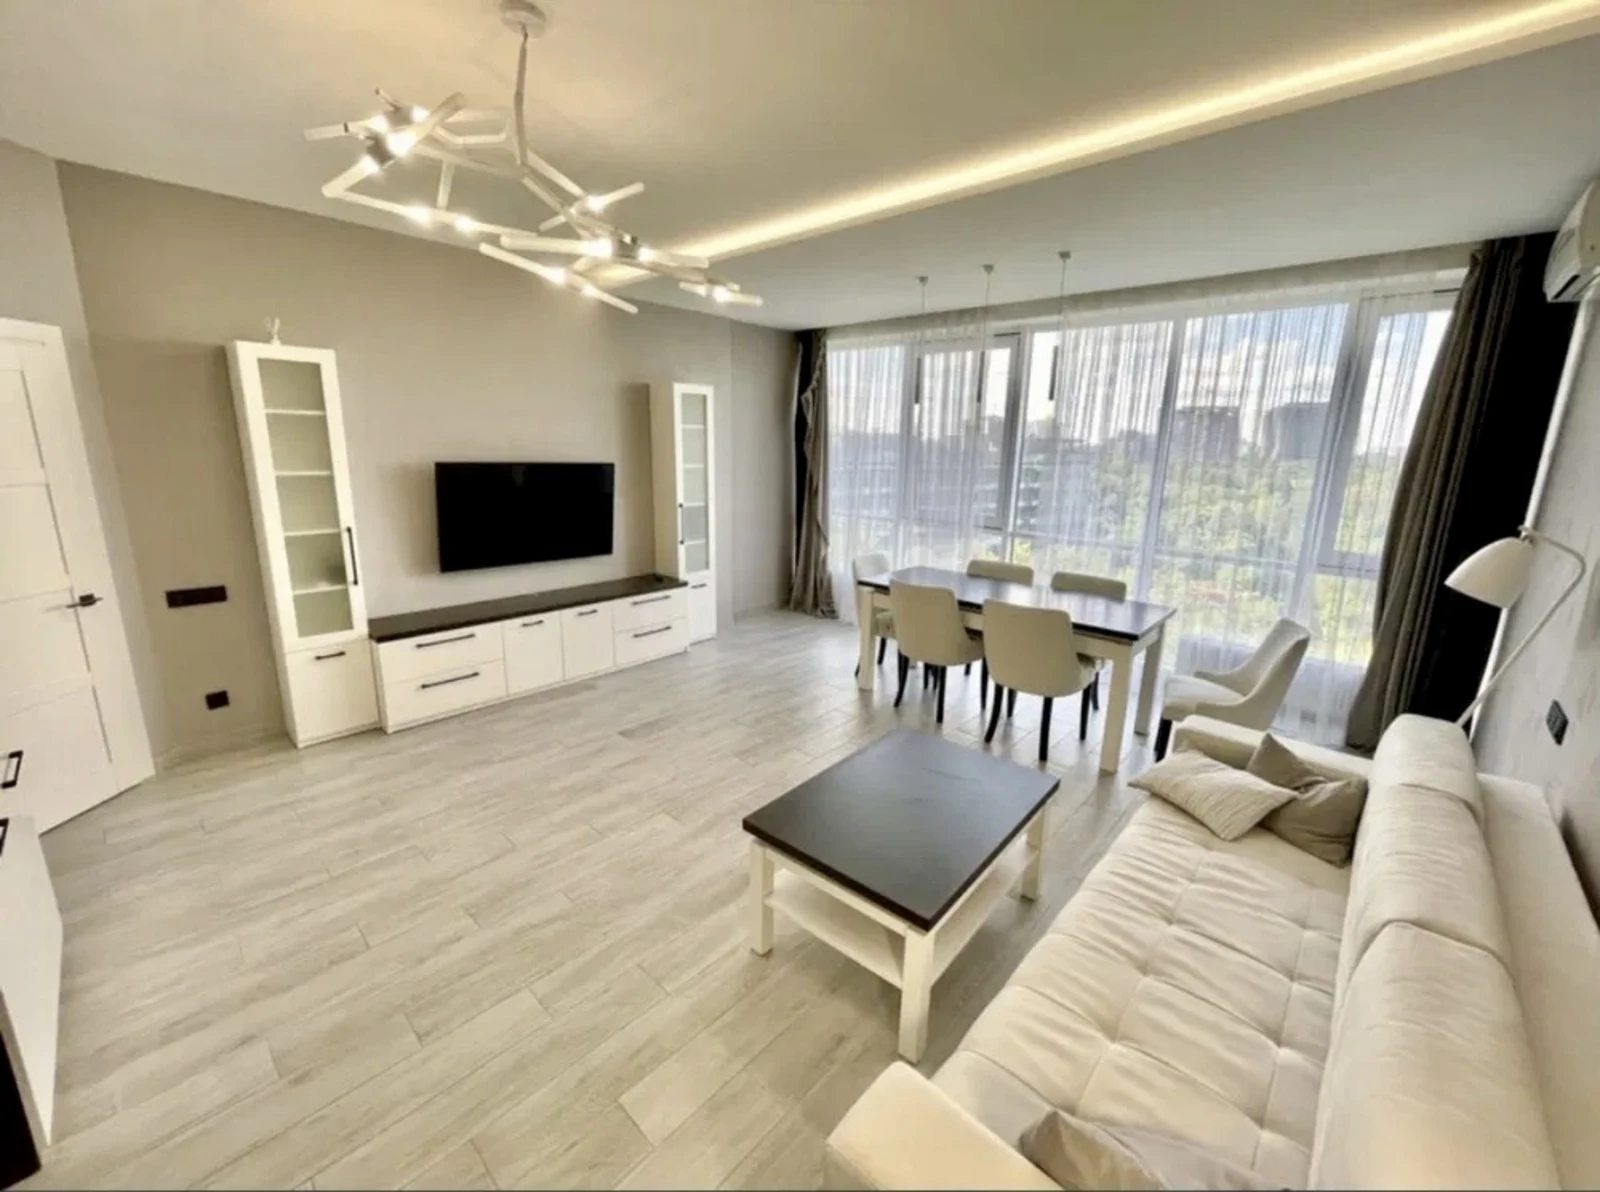 Apartments for sale. 2 rooms, 73 m², 9th floor/16 floors. Frantsuzskyy b-r, Odesa. 